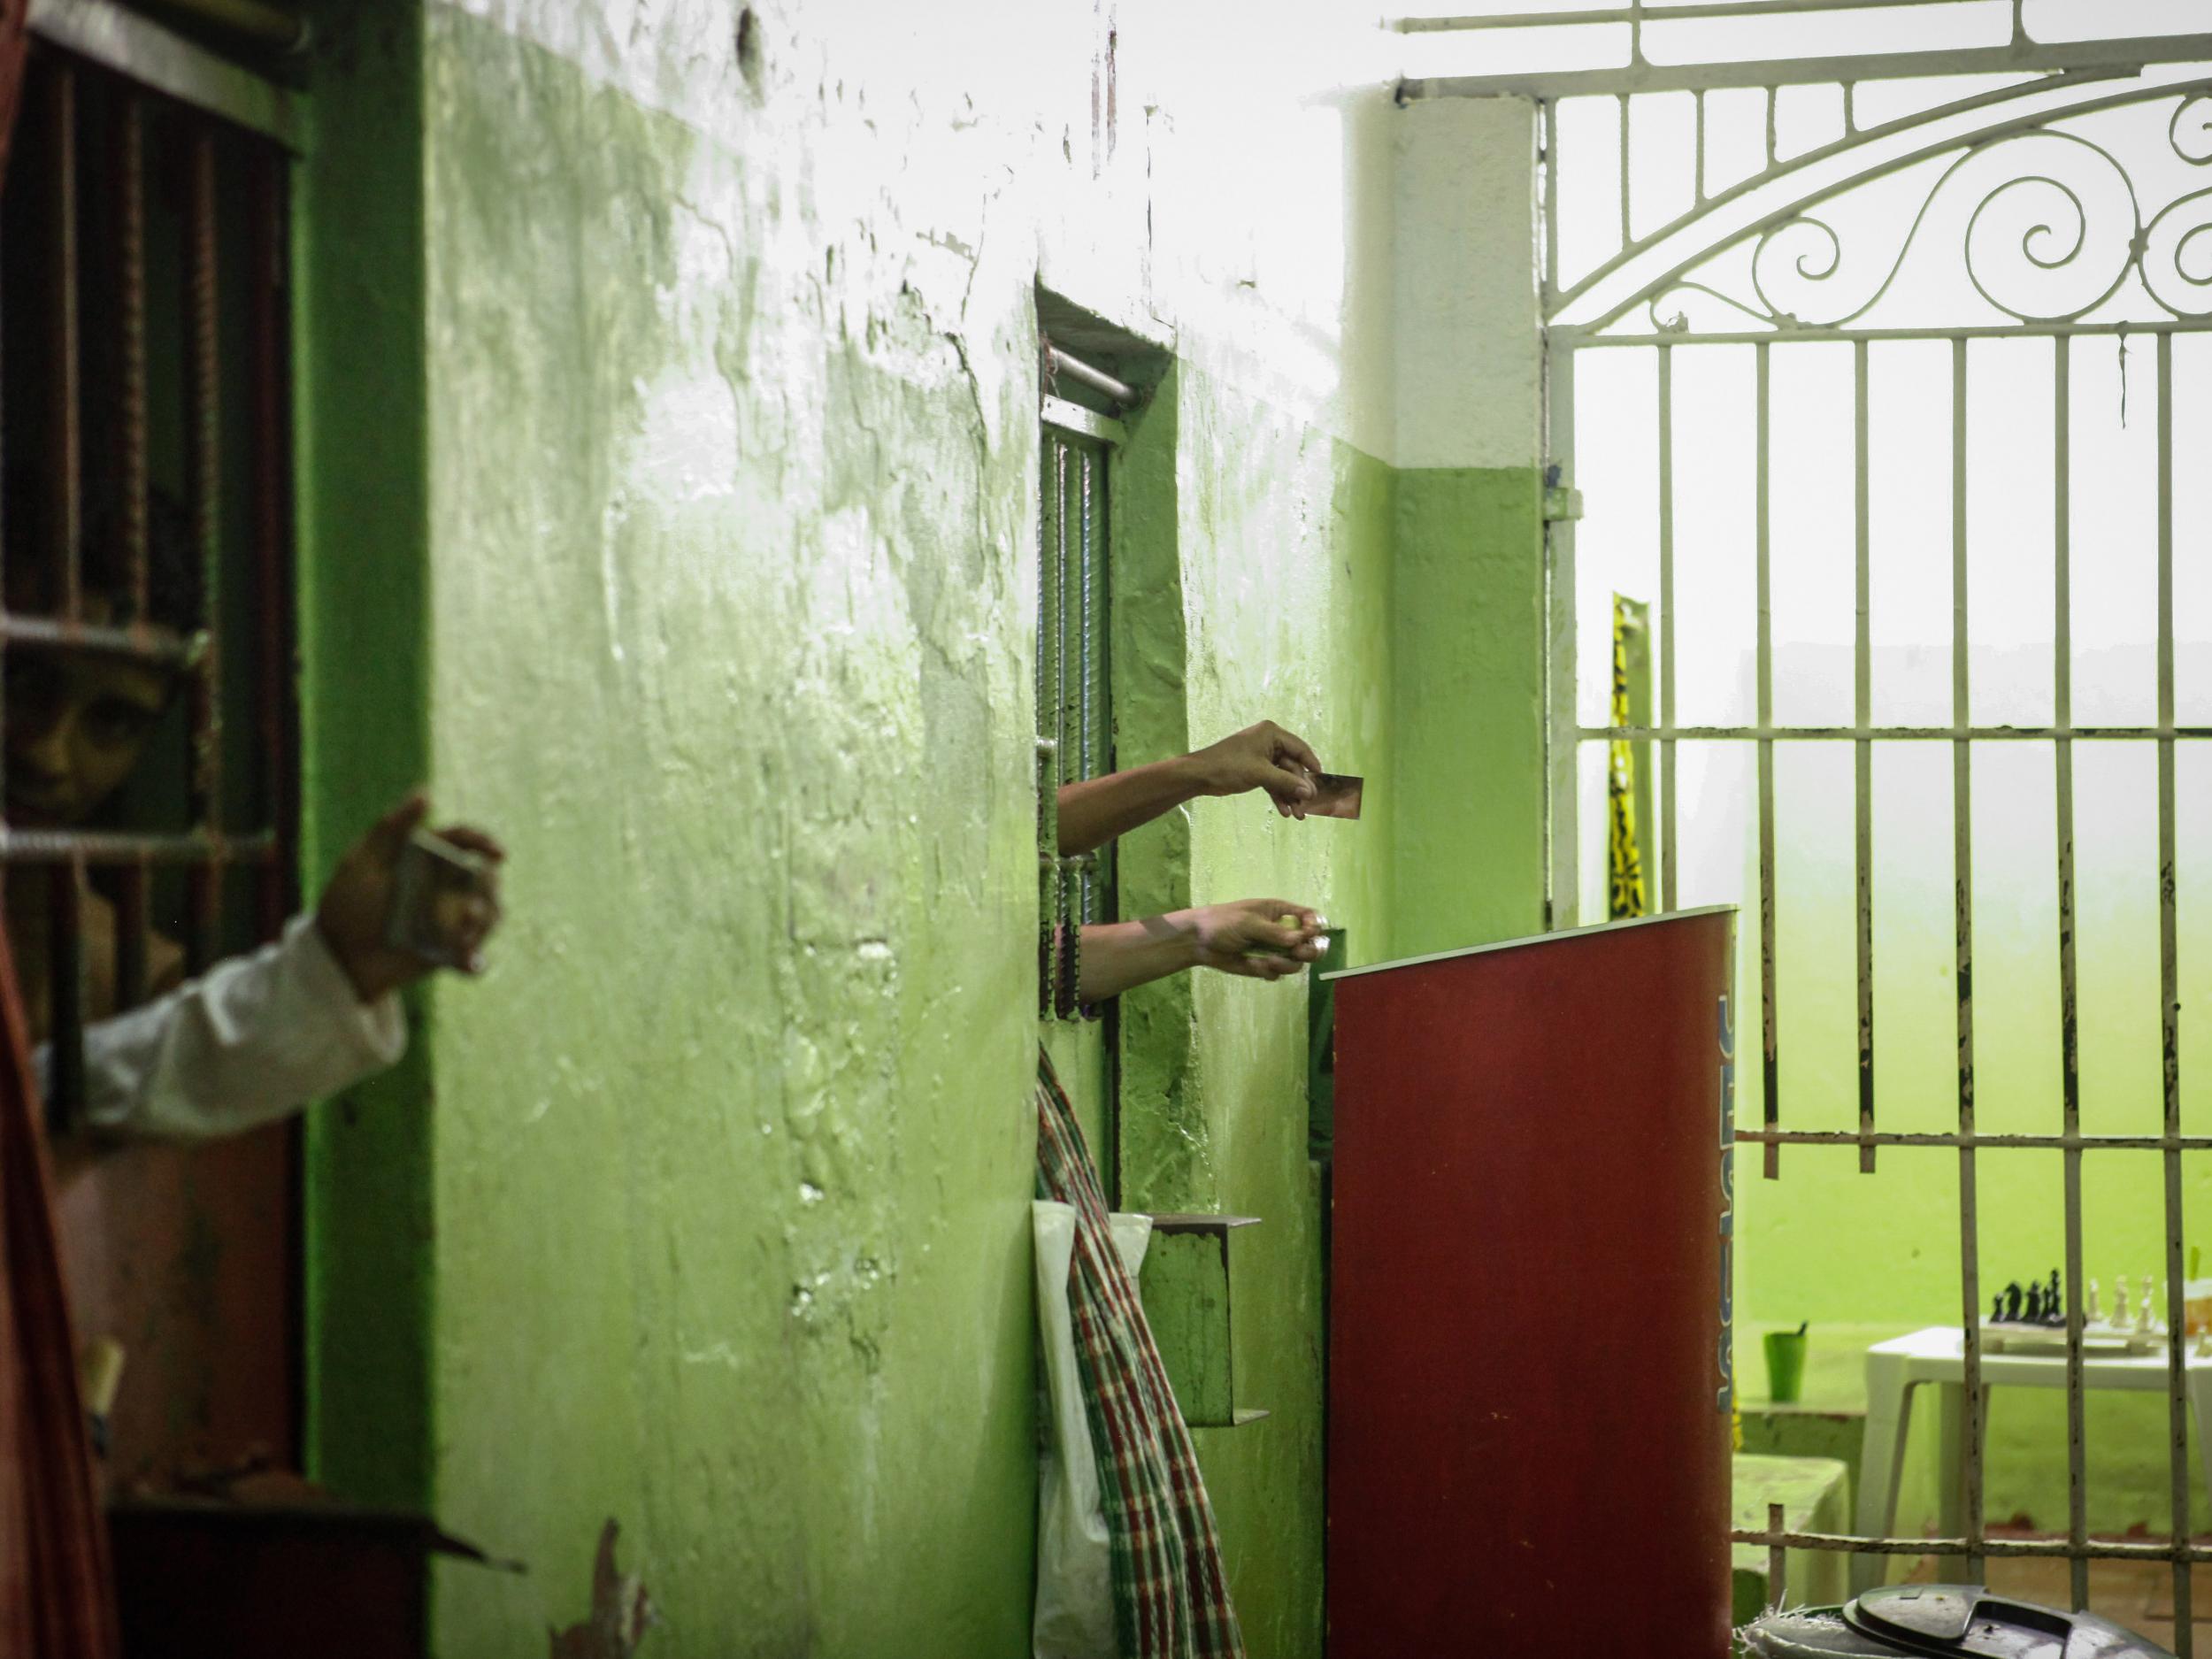 Inmates use mirrors to view visitors from their cells in a Brazil prison